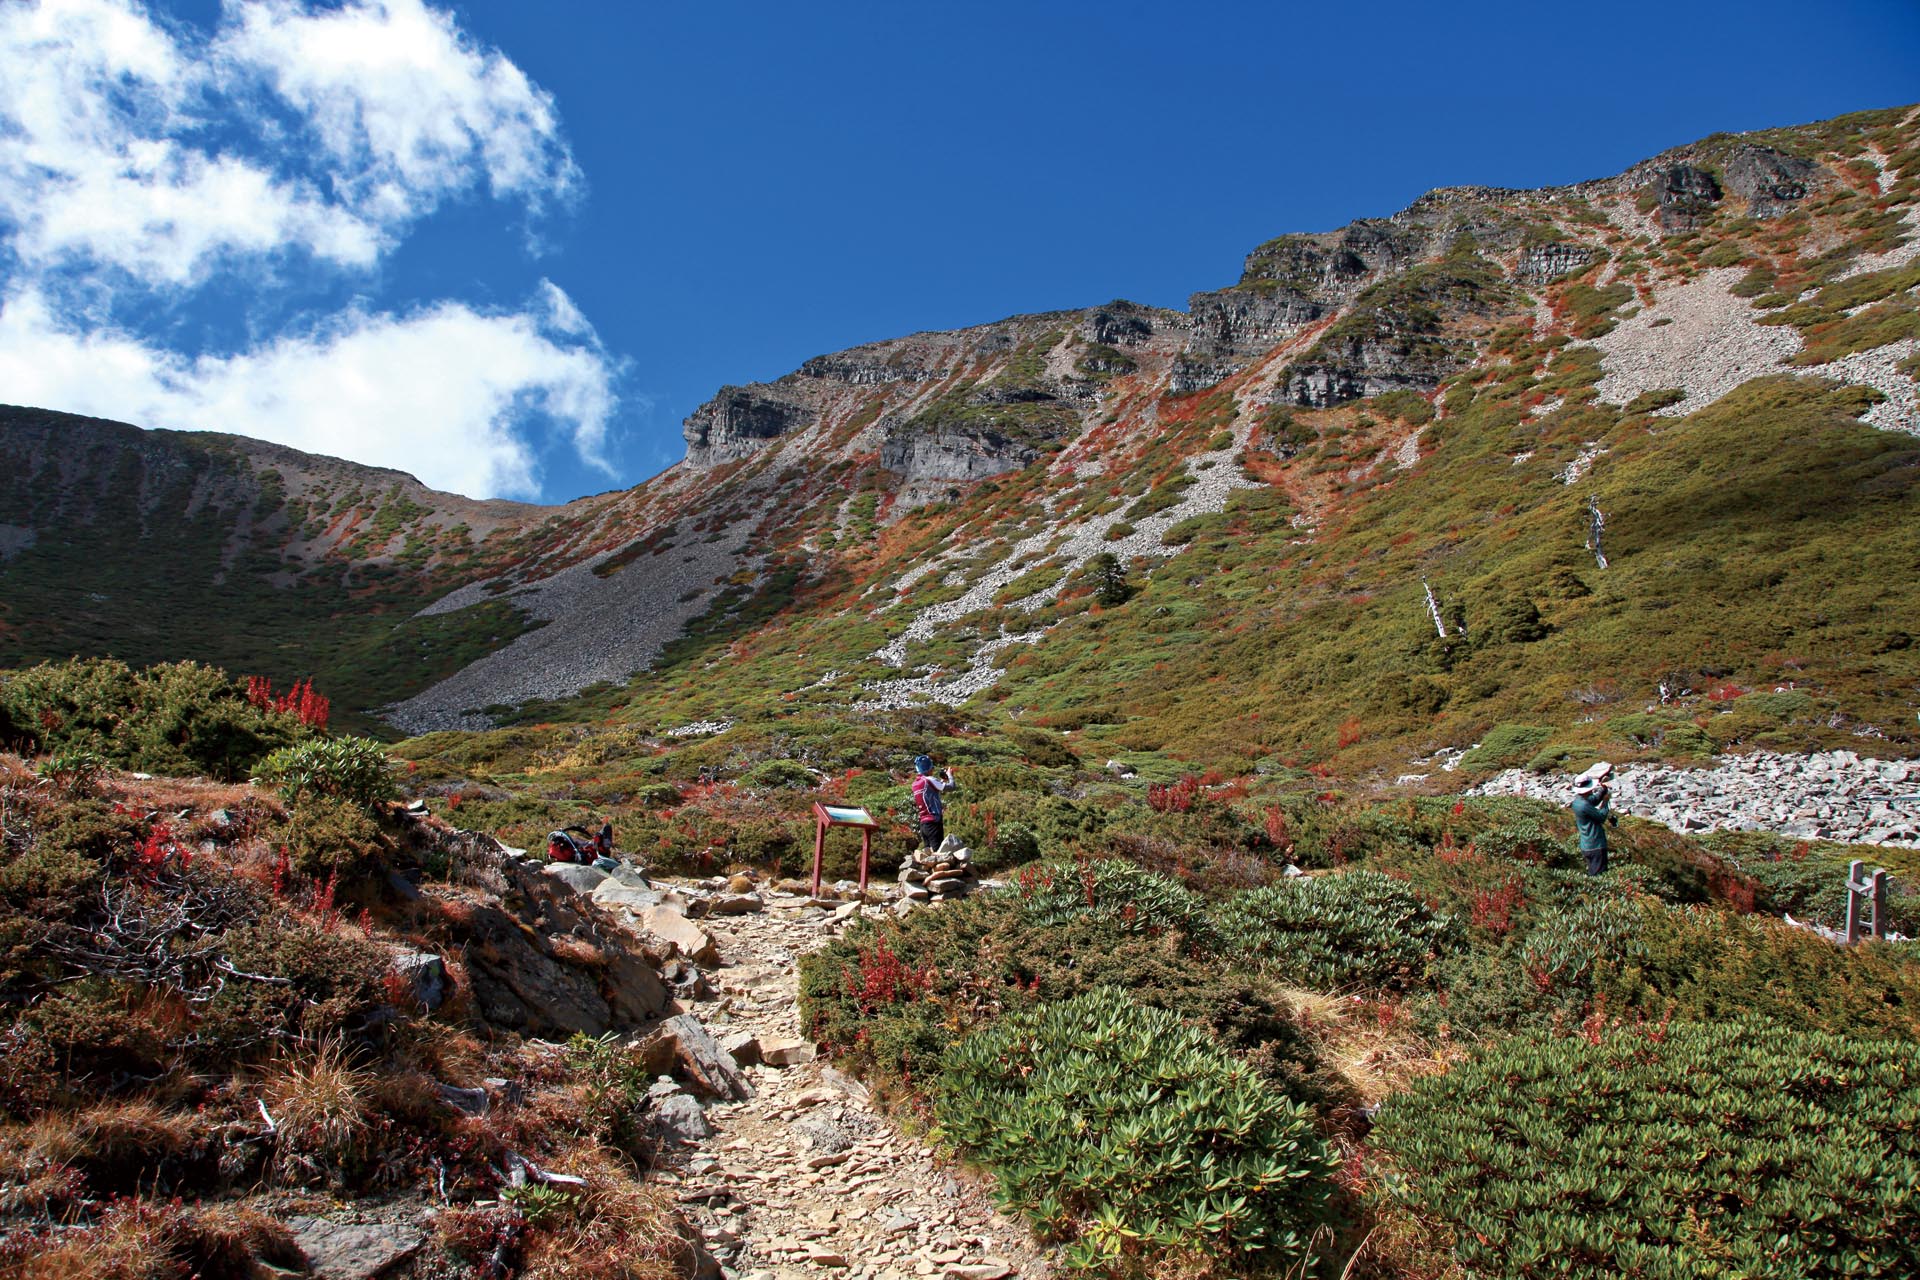 The Alpine krummholz in autumn forms a picturesque scenery in high mountains.